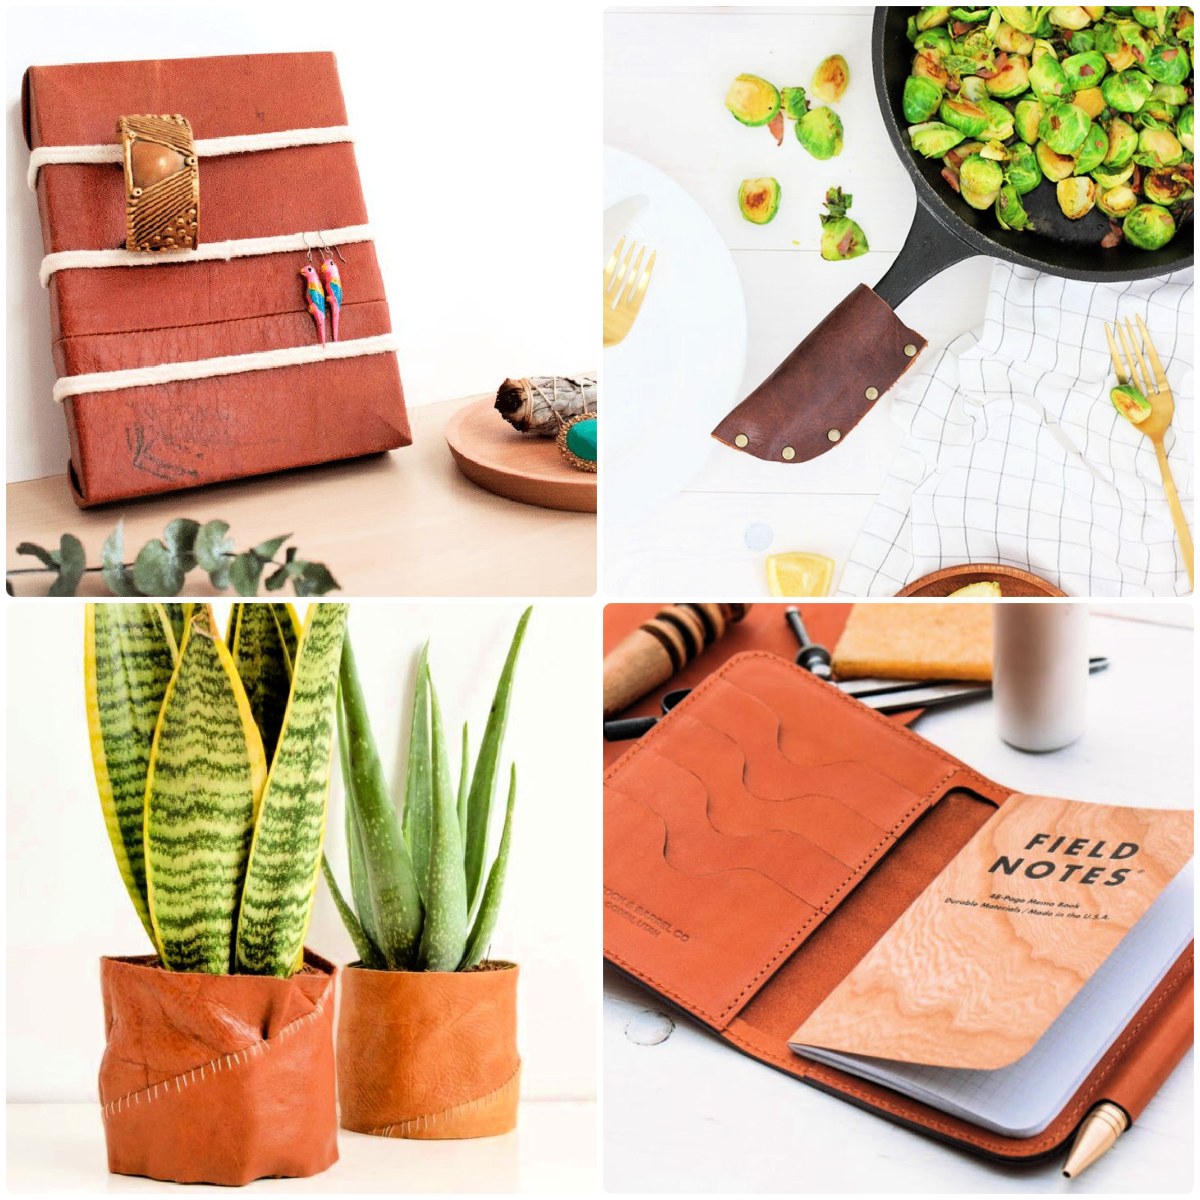 How To Get Free Leather For Crafts (and 14 Leather Craft Ideas)